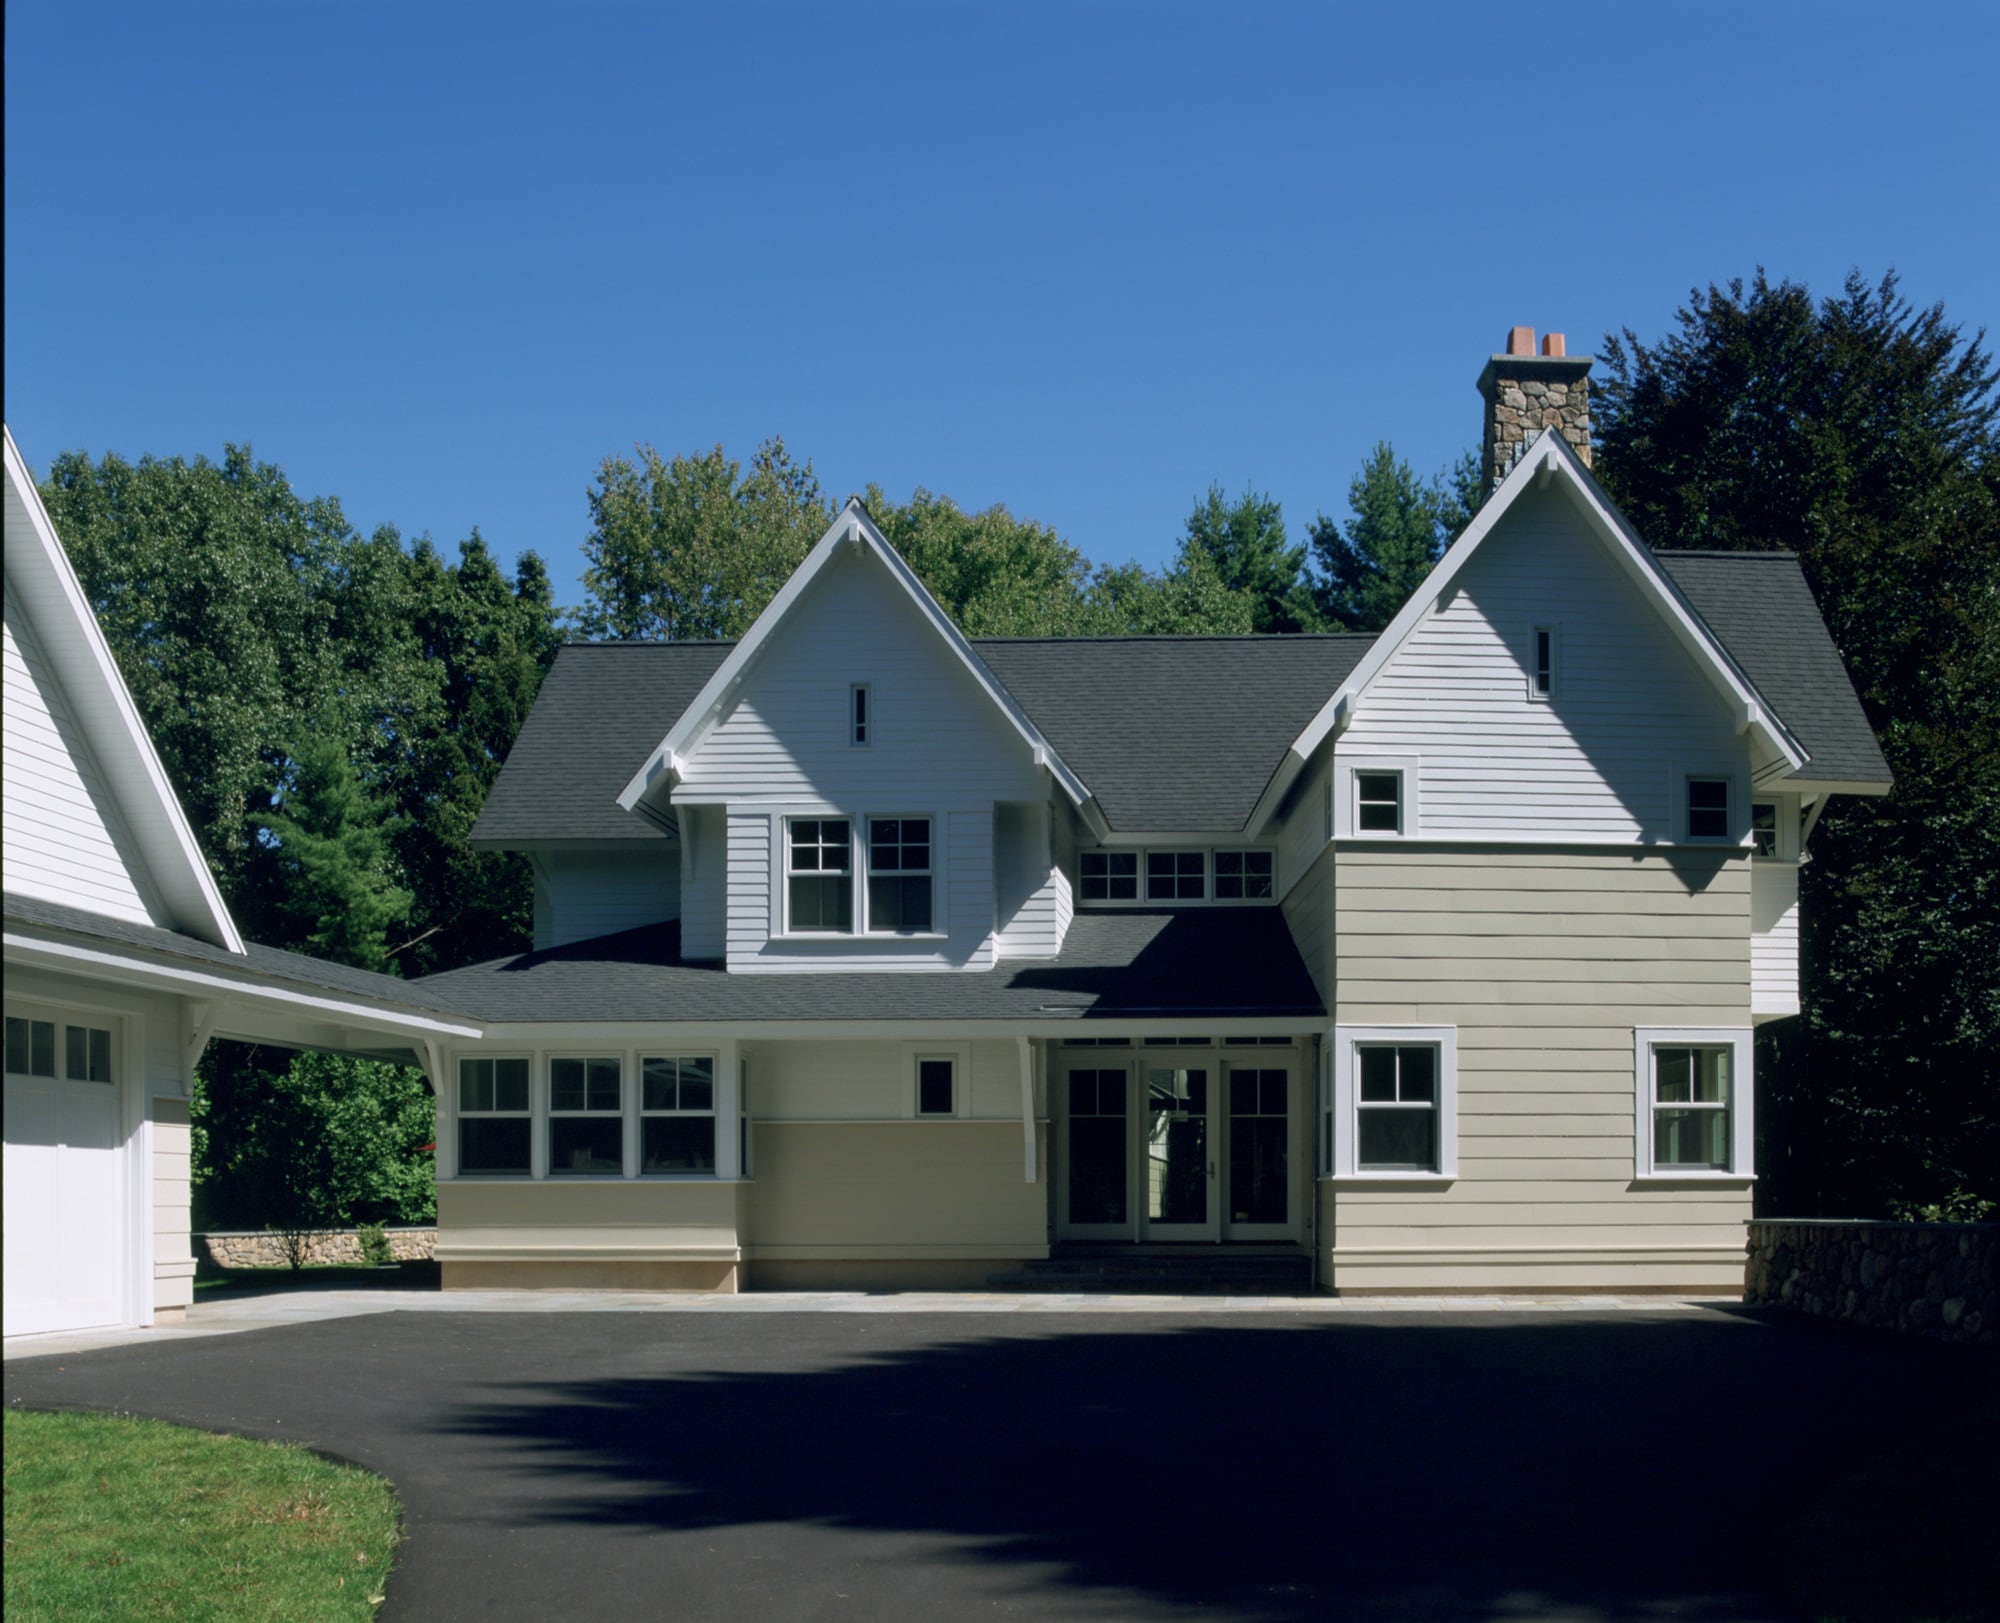 Distinctive New England Rural - Residential Architecture